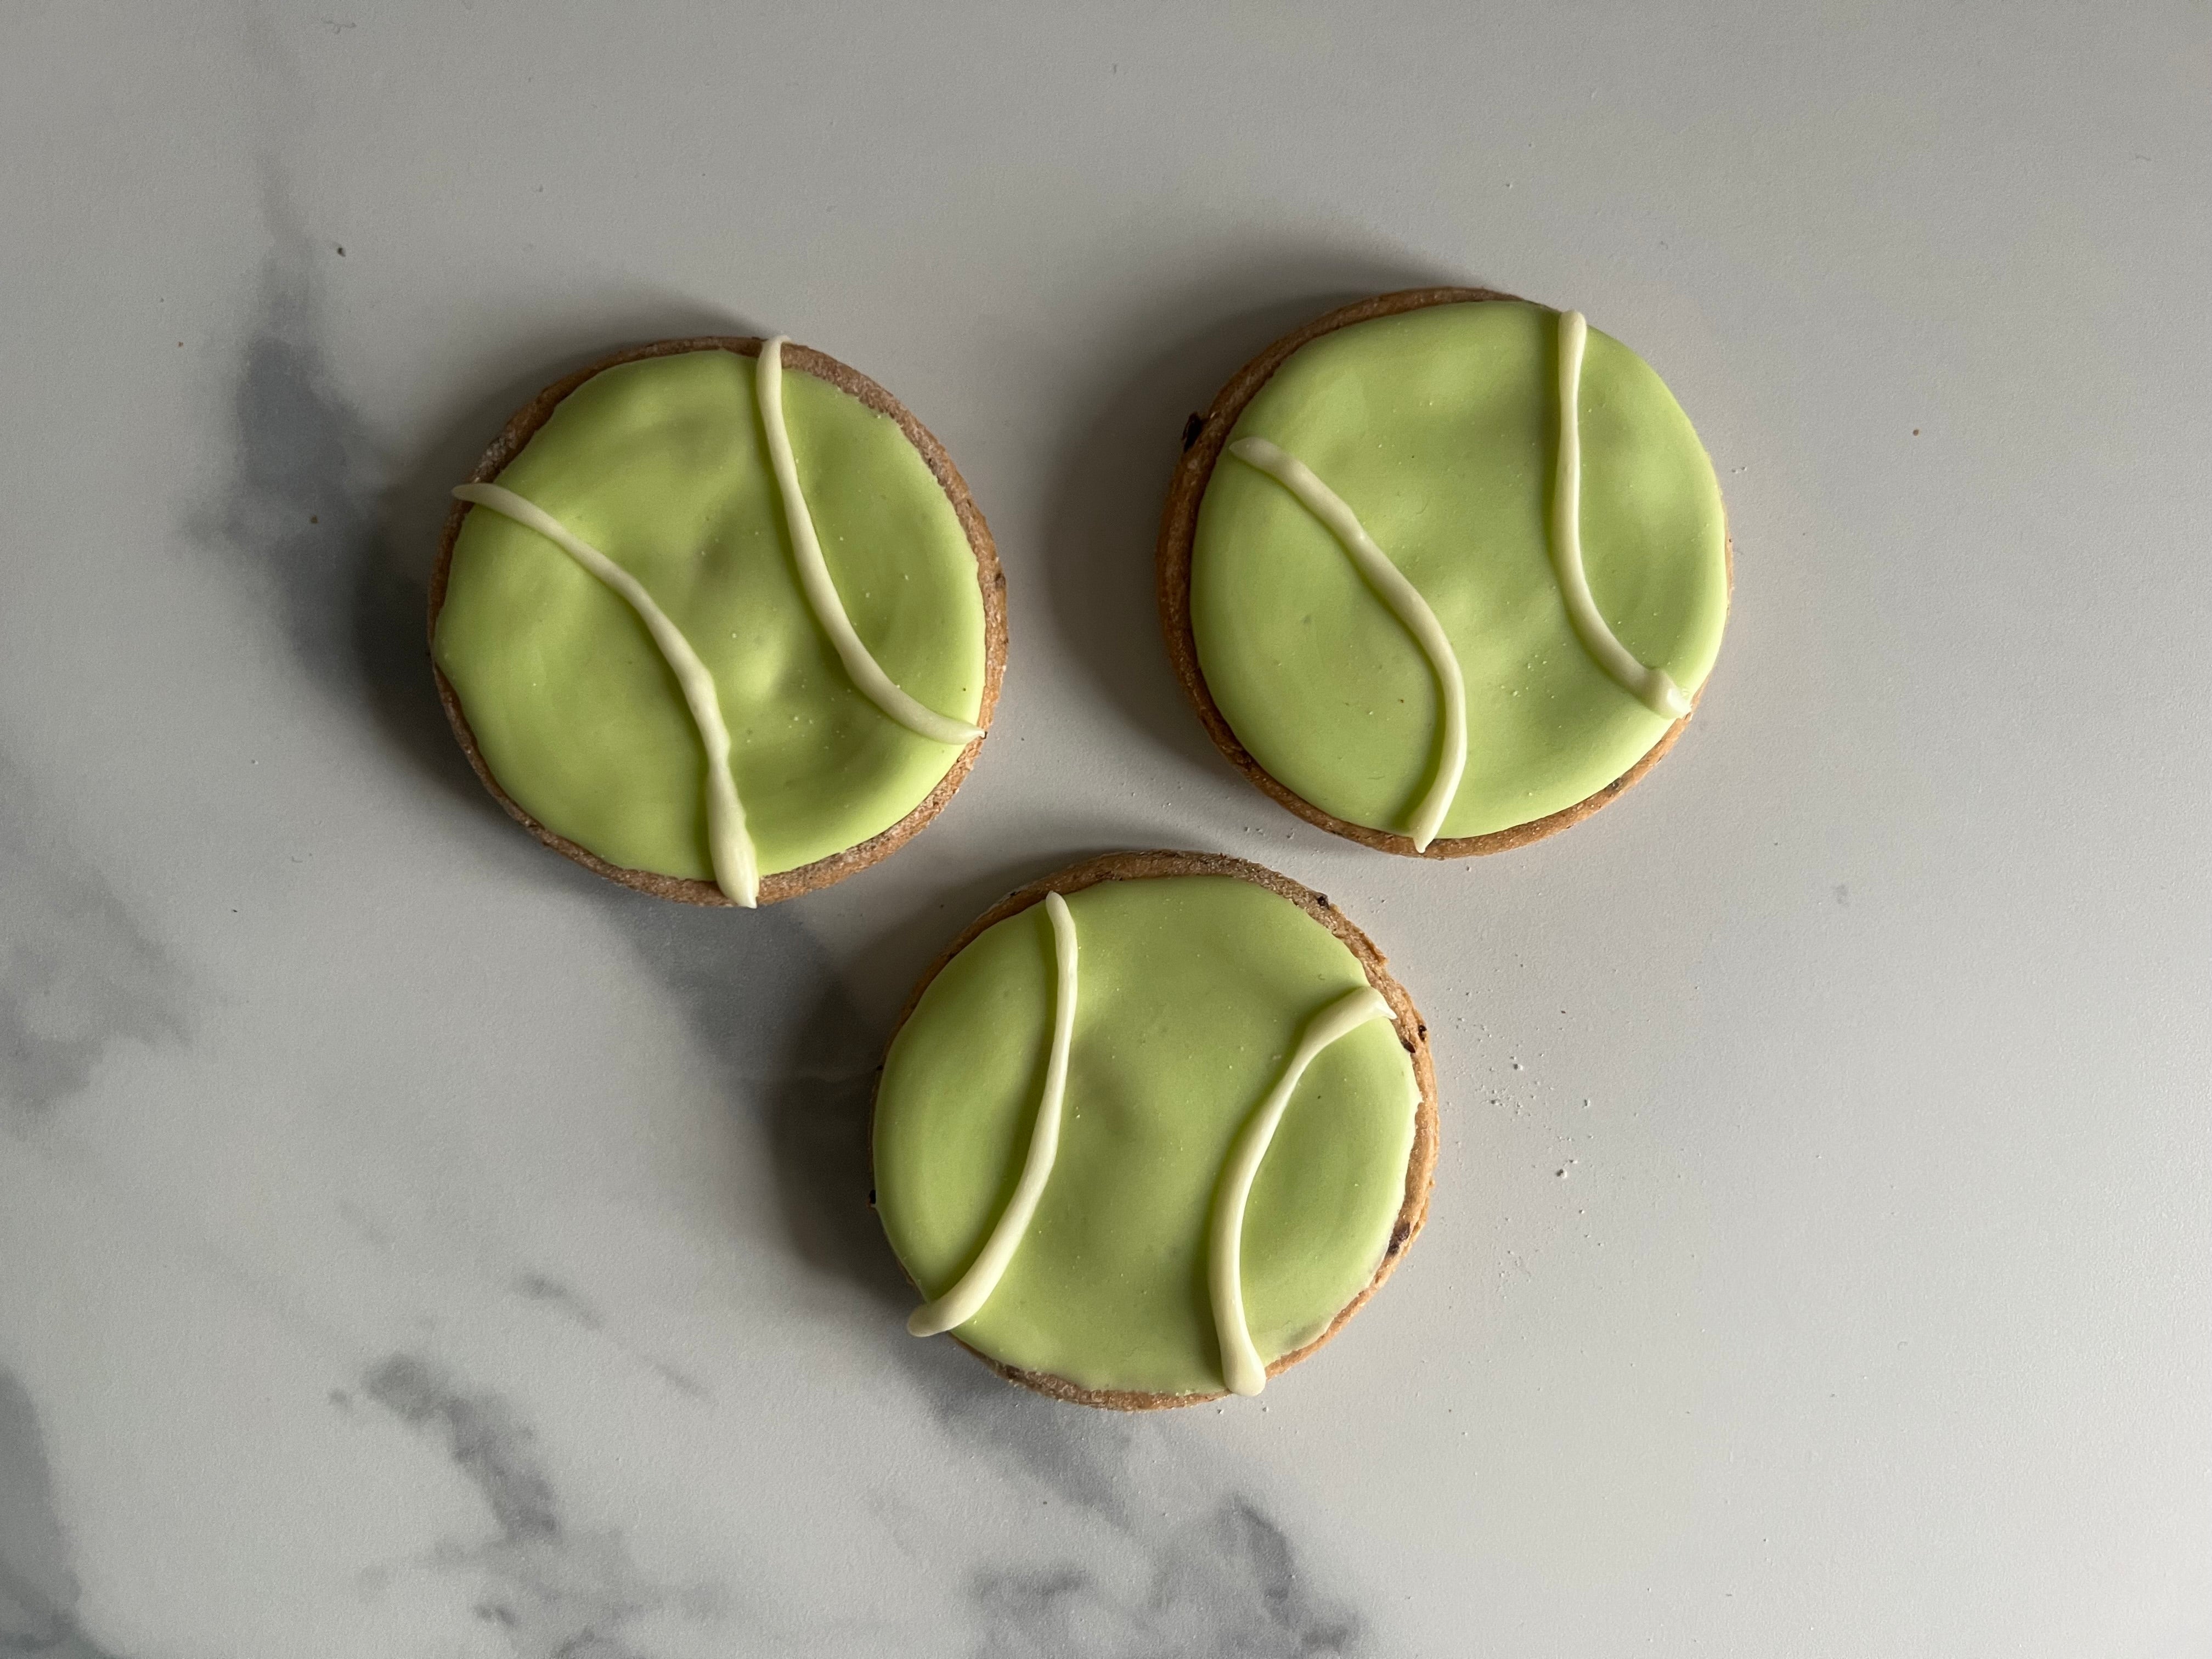 TENNIS BALL BISCUITS